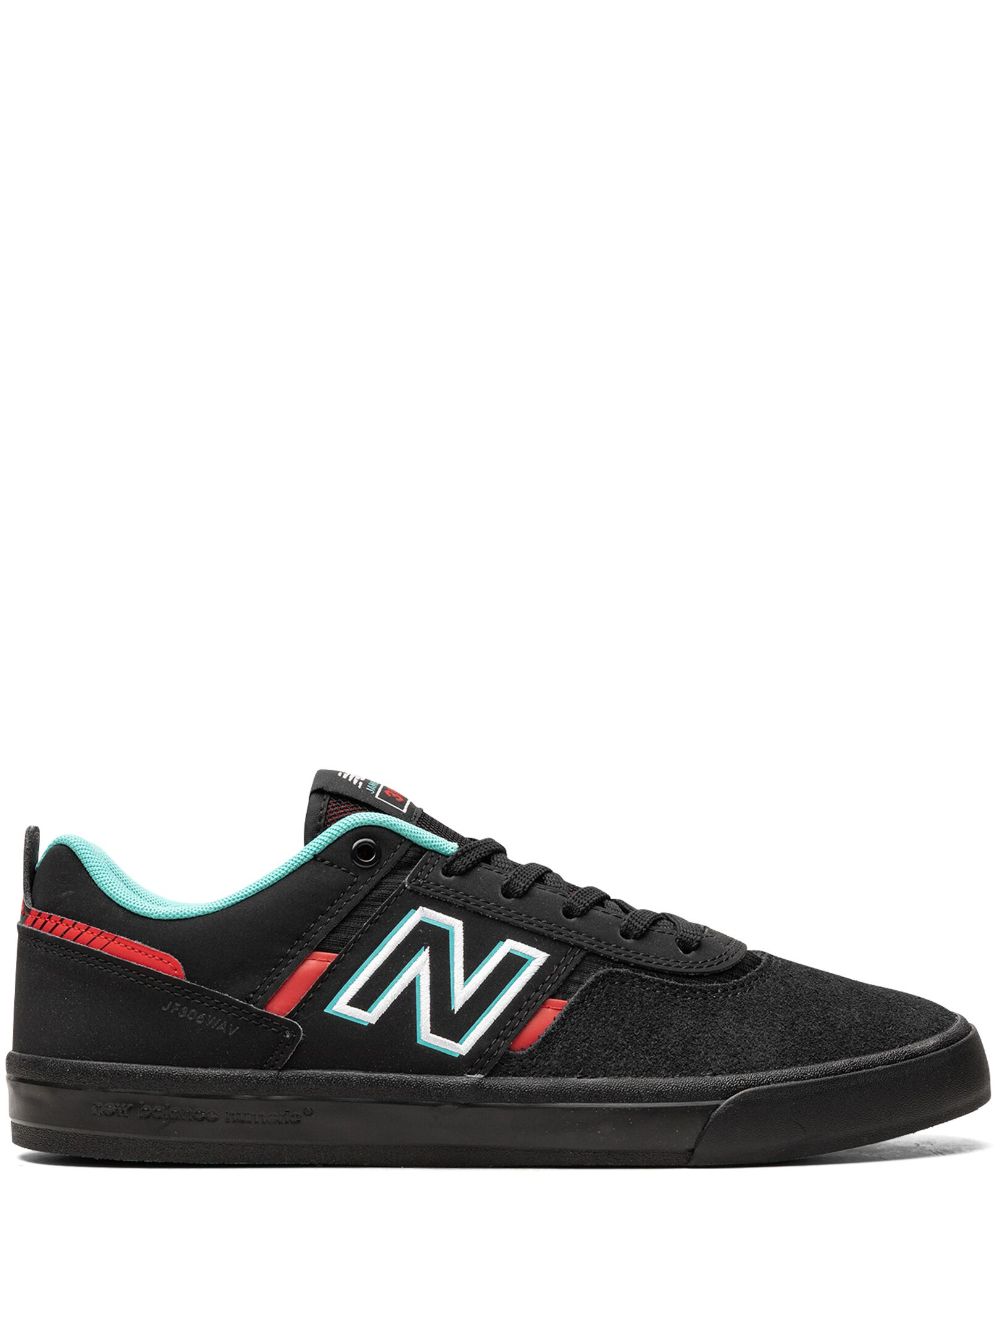 New Balance Numeric 306 "Black/Electric Red" sneakers